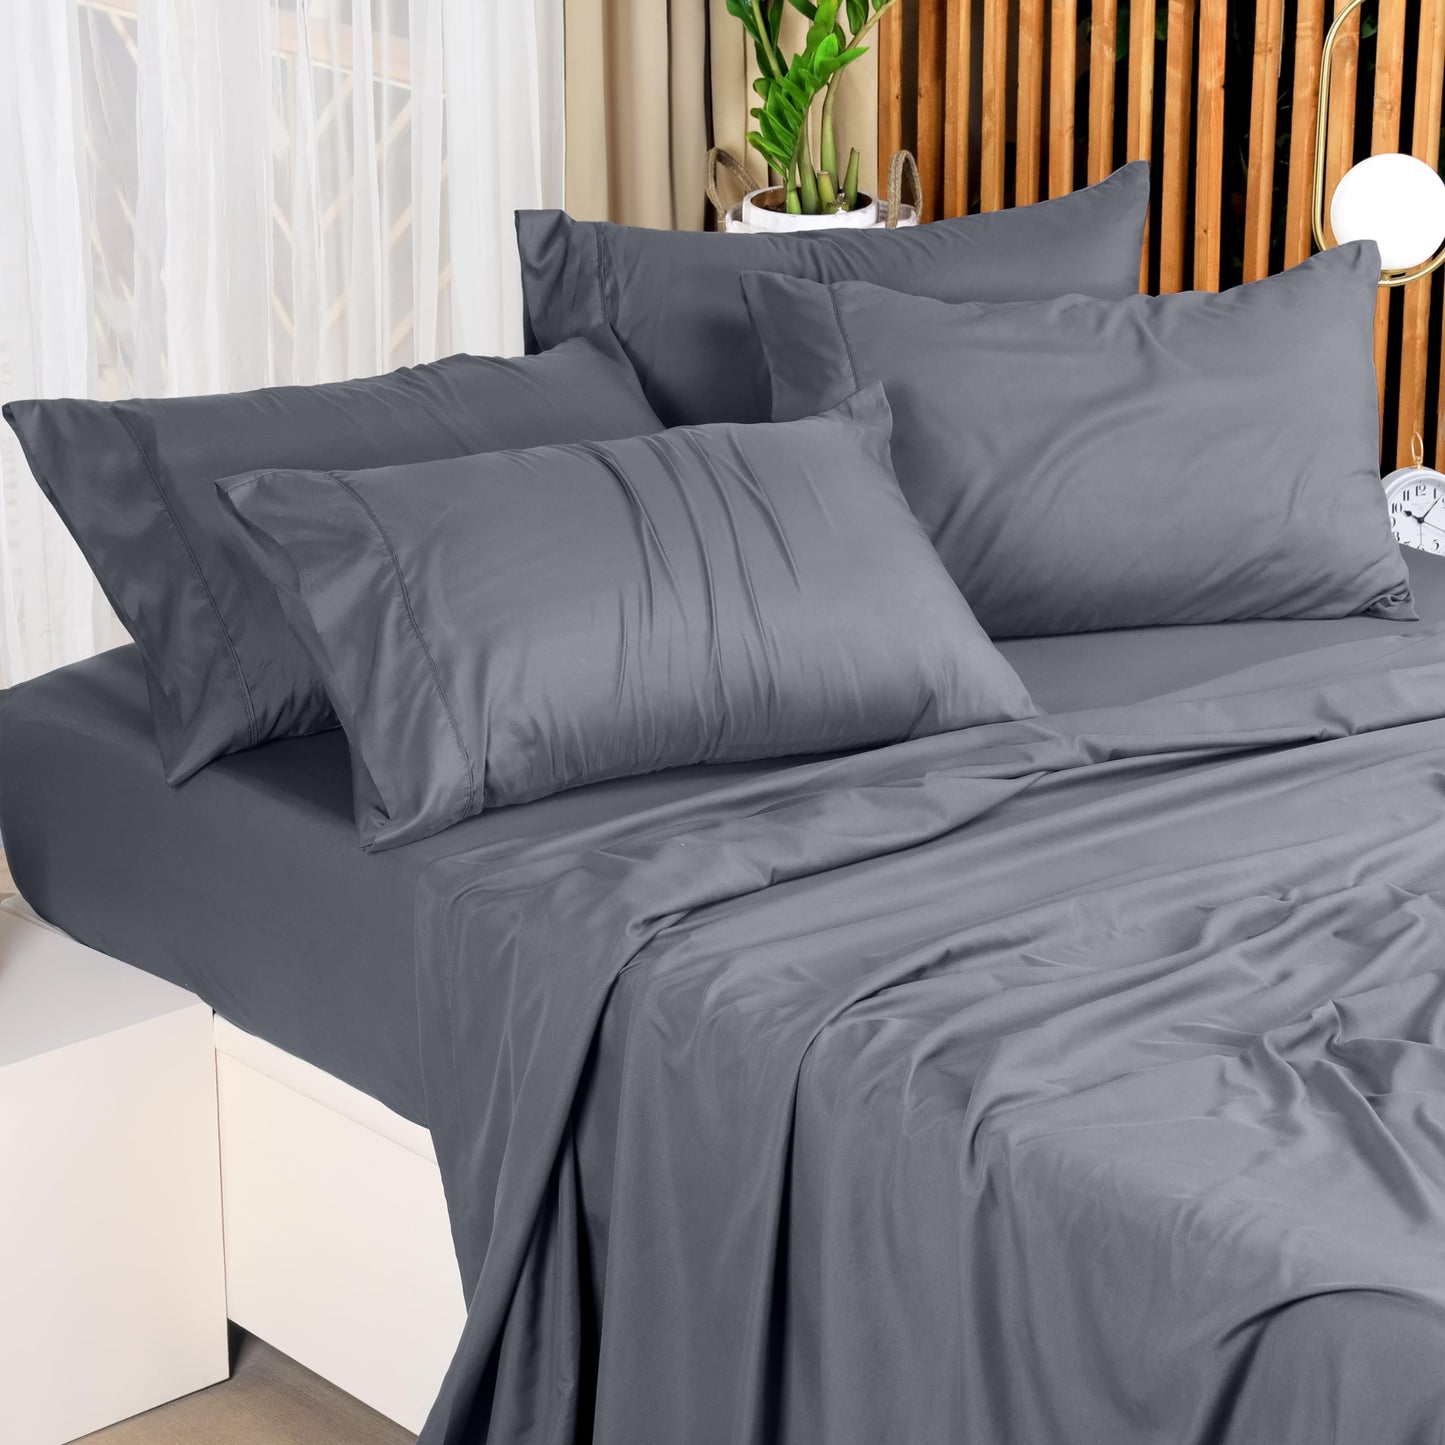 Utopia Bed Sheets Set - 4 Piece Bedding - Brushed Microfiber - Shrinkage and Fade Resistant - Easy Care (Full, Grey)